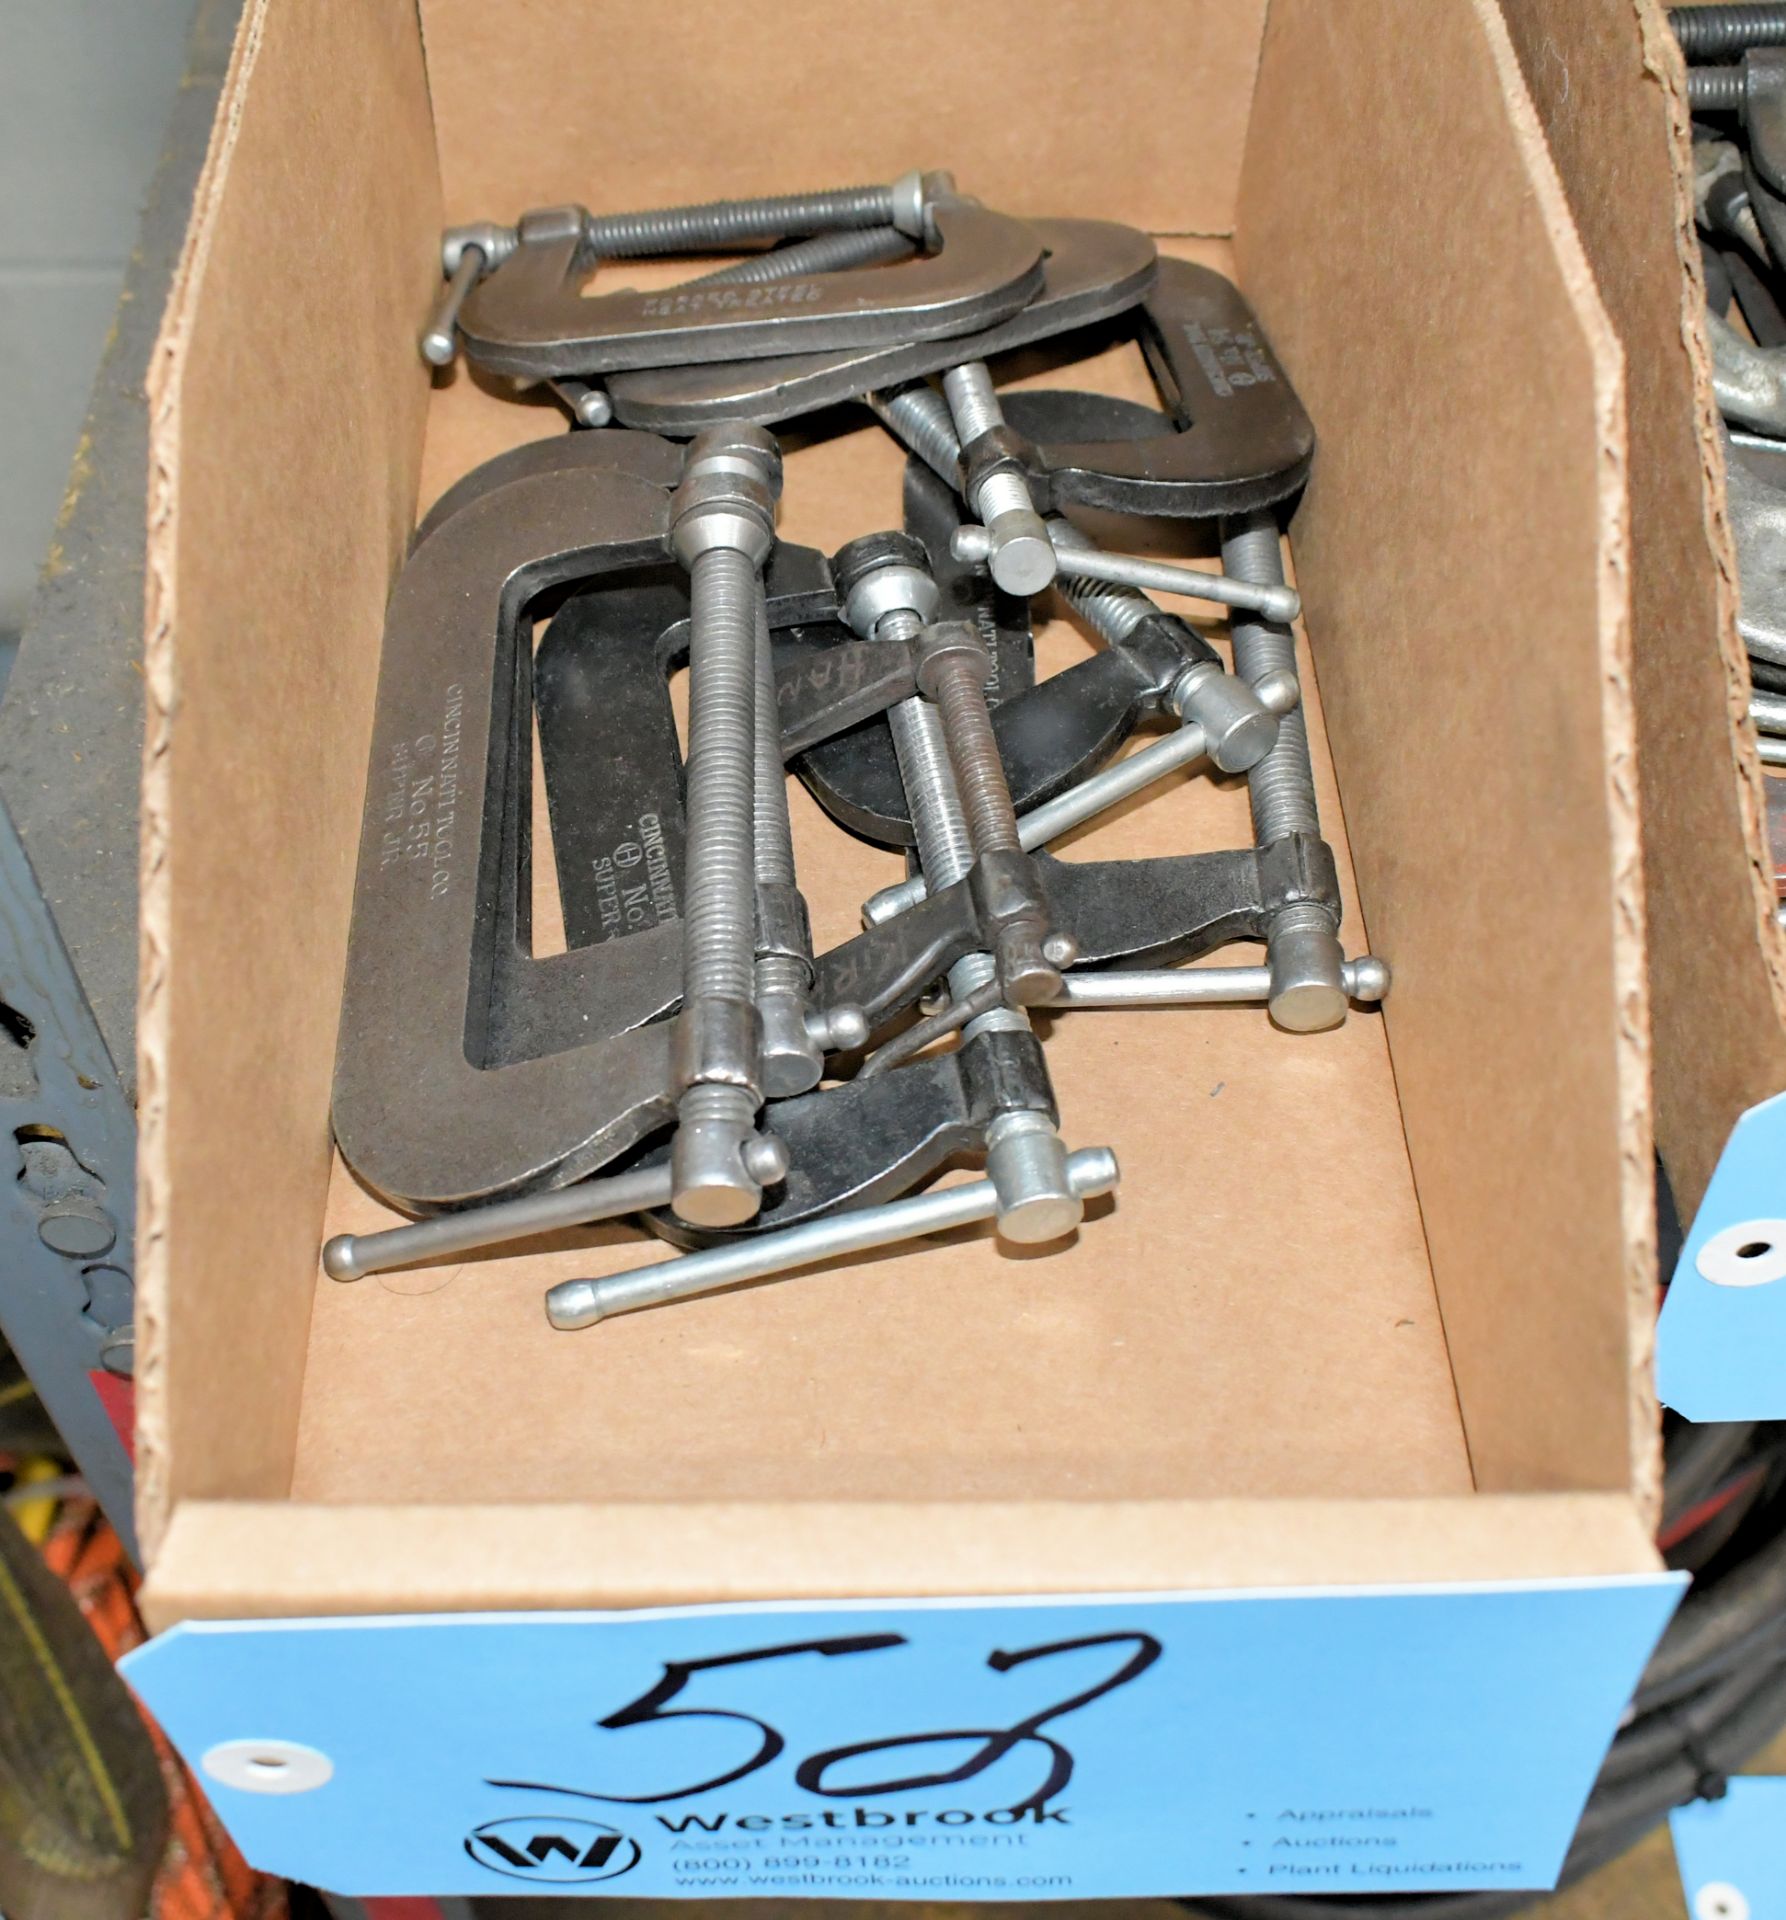 Lot-Various C-Clamps in (1) Box